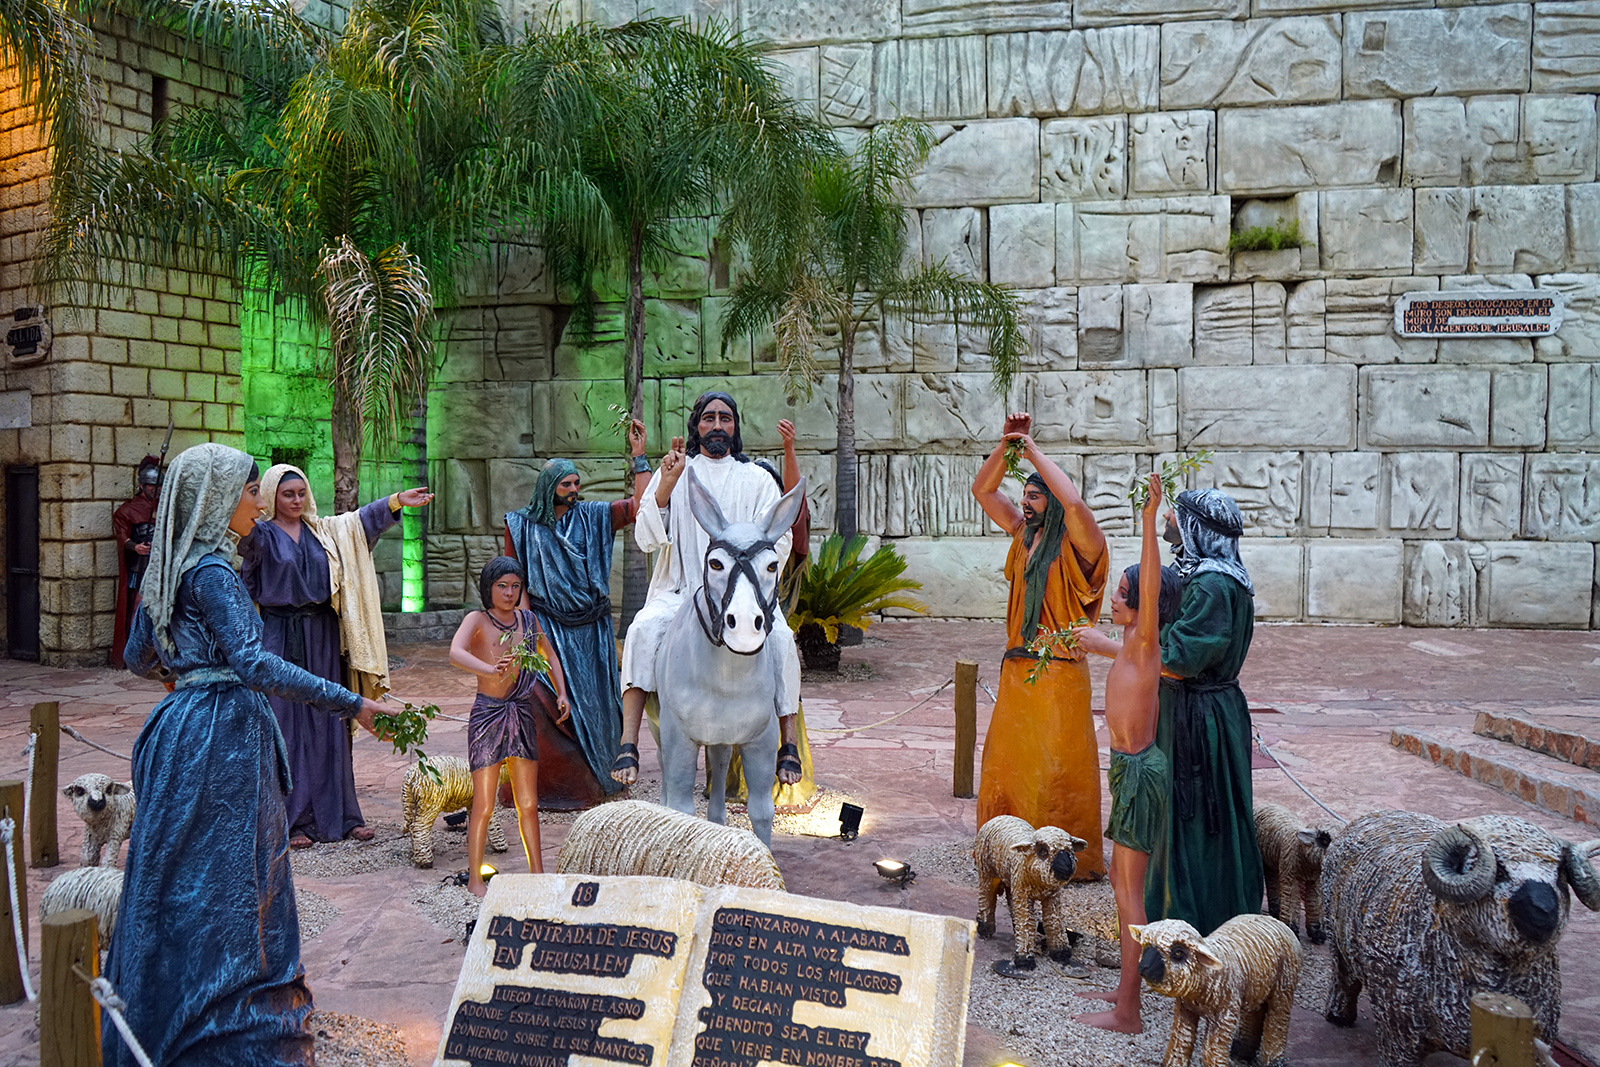 The triumphal entry and the wailing wall